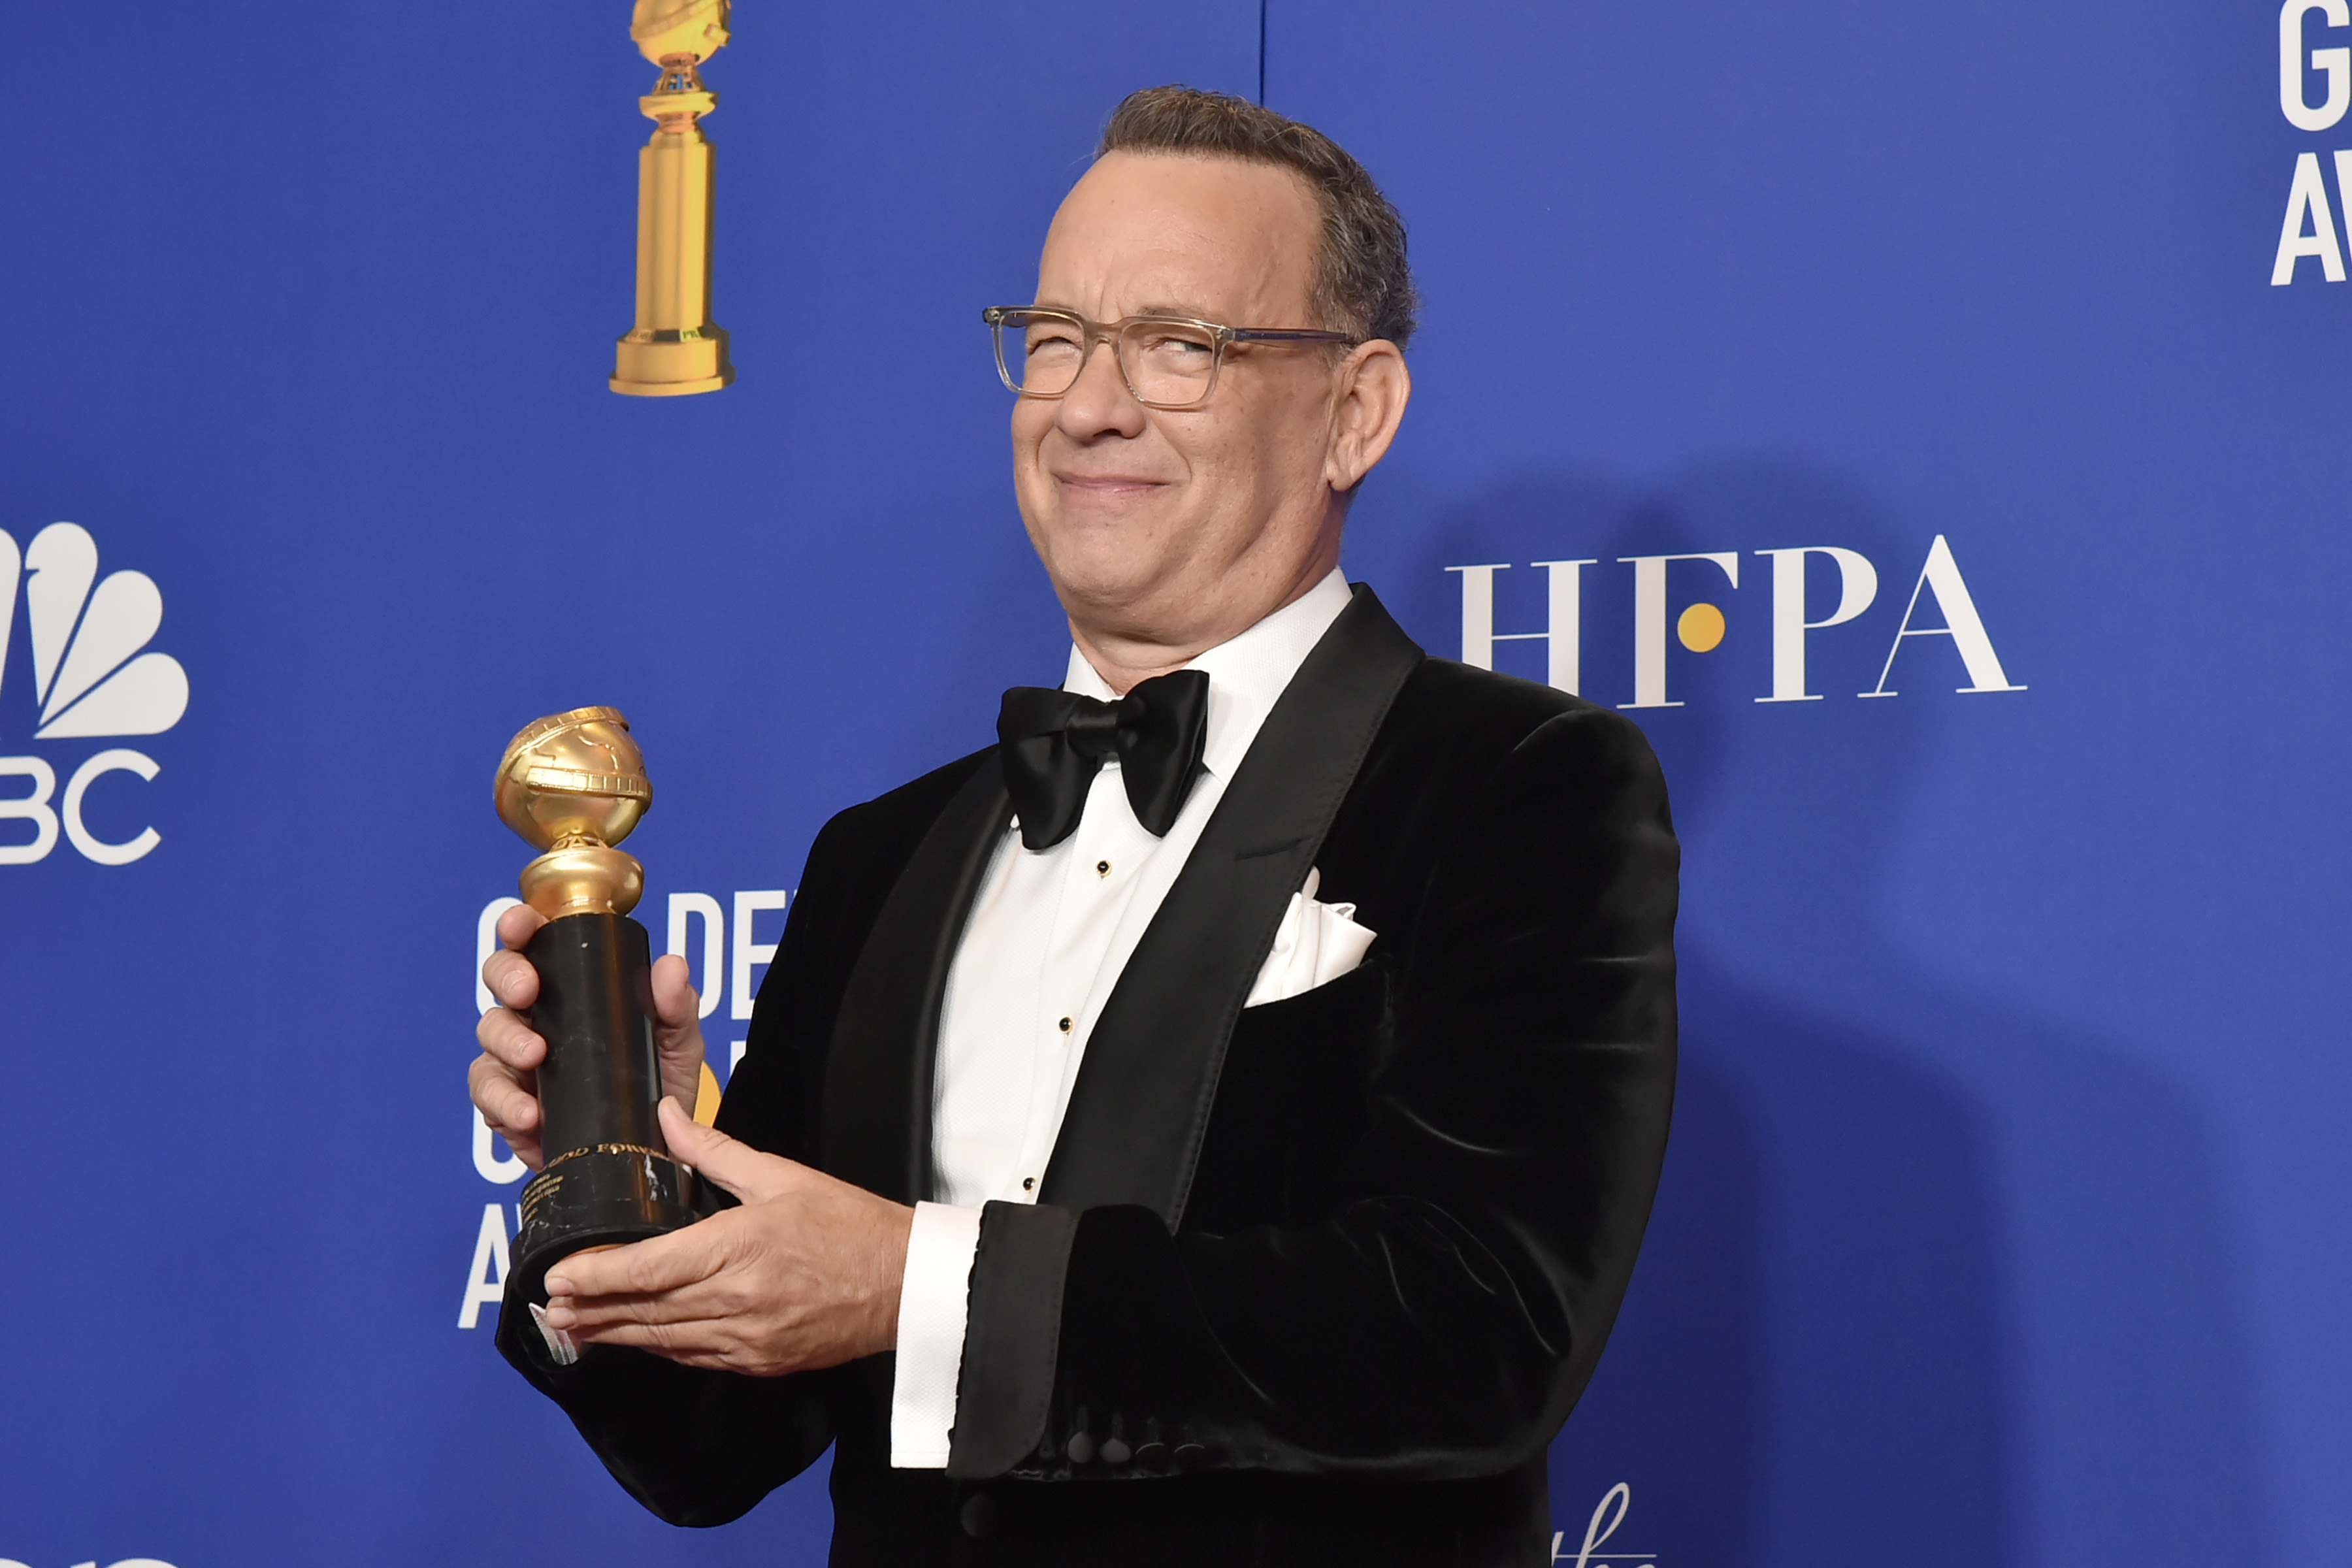 A Beautiful Day in the Neighborhood star Tom Hanks holds a Golden Globe